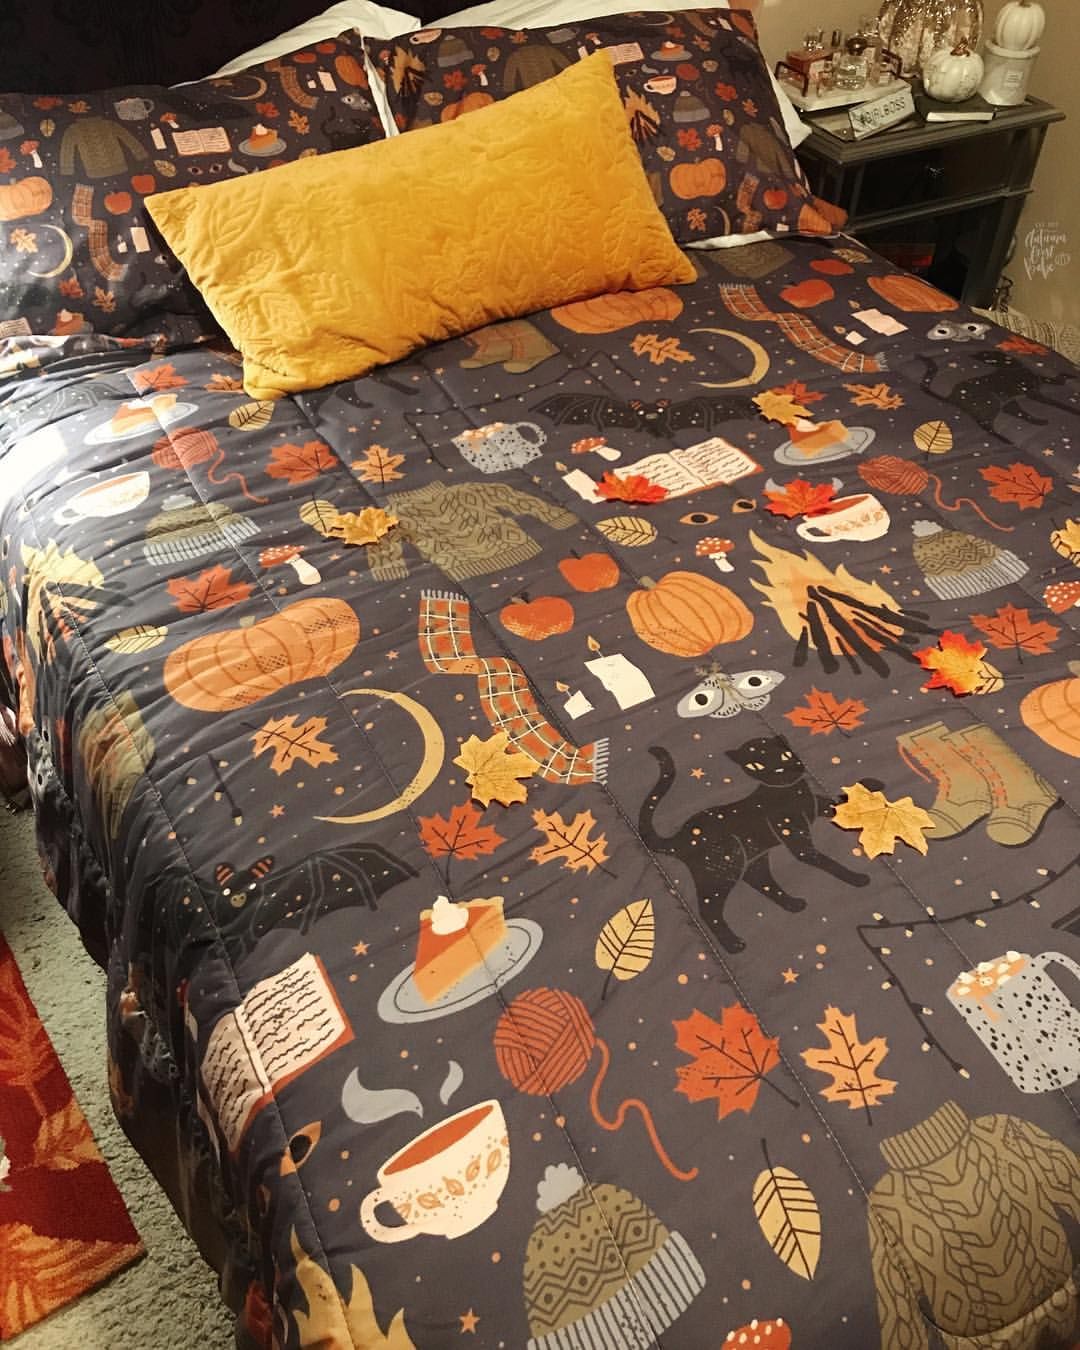 Cover bed for halloween